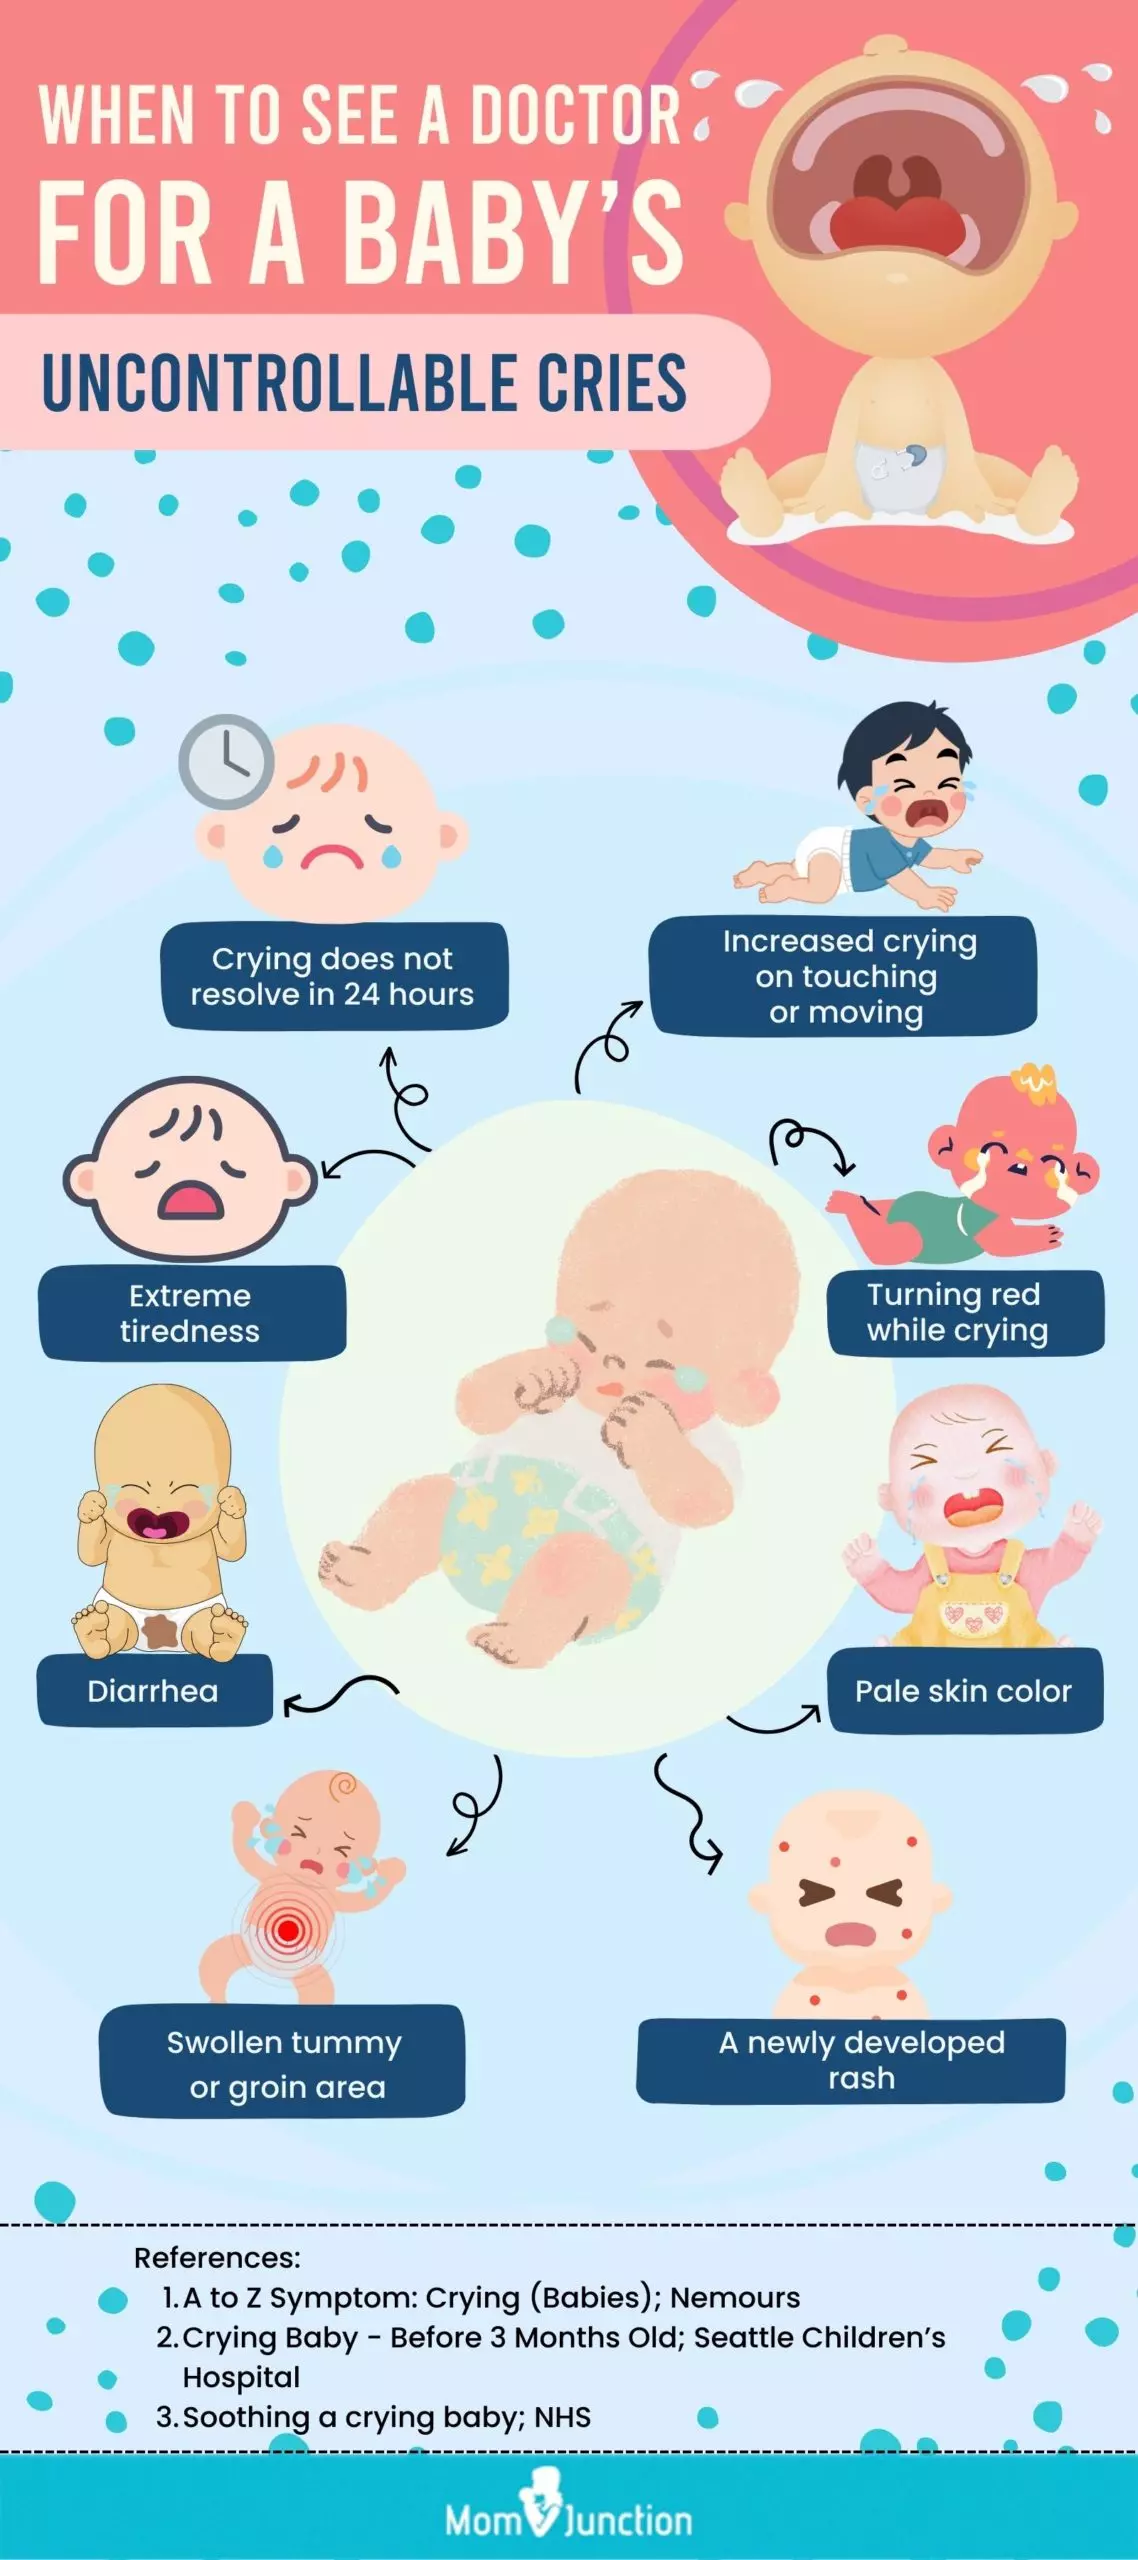 when to see a doctor for a baby’s uncontrollable cries.jpg (infographic)